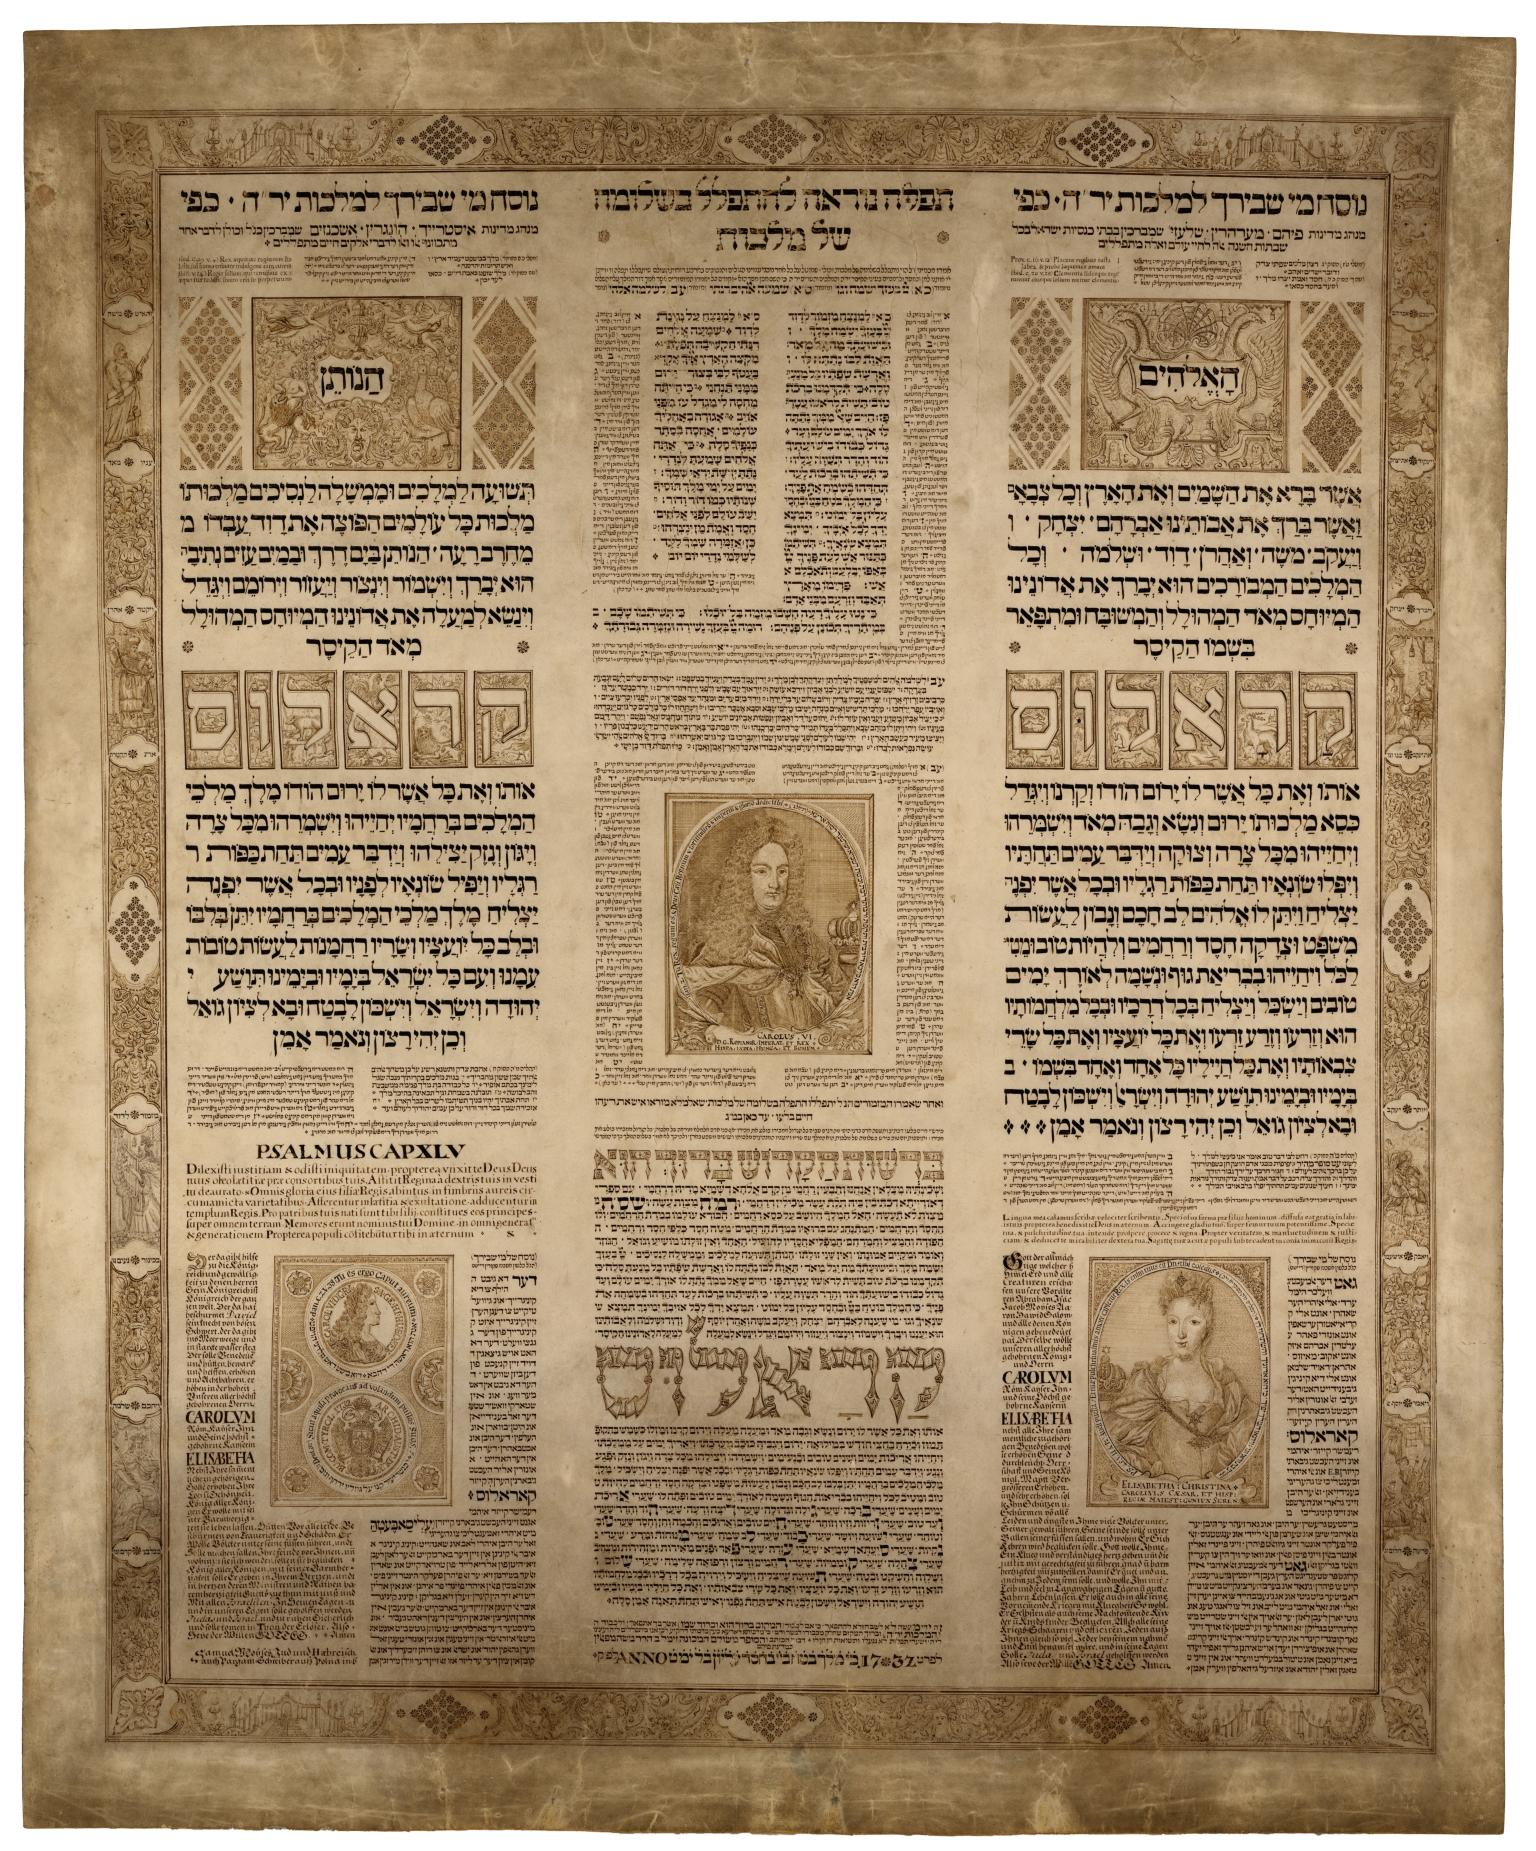 Printed page with three columns of Hebrew, German in Hebrew characters, Latin, and Aramaic text in various fonts and sizes, interspersed with small portraits of a man and a woman, and surrounded by decorative border. 